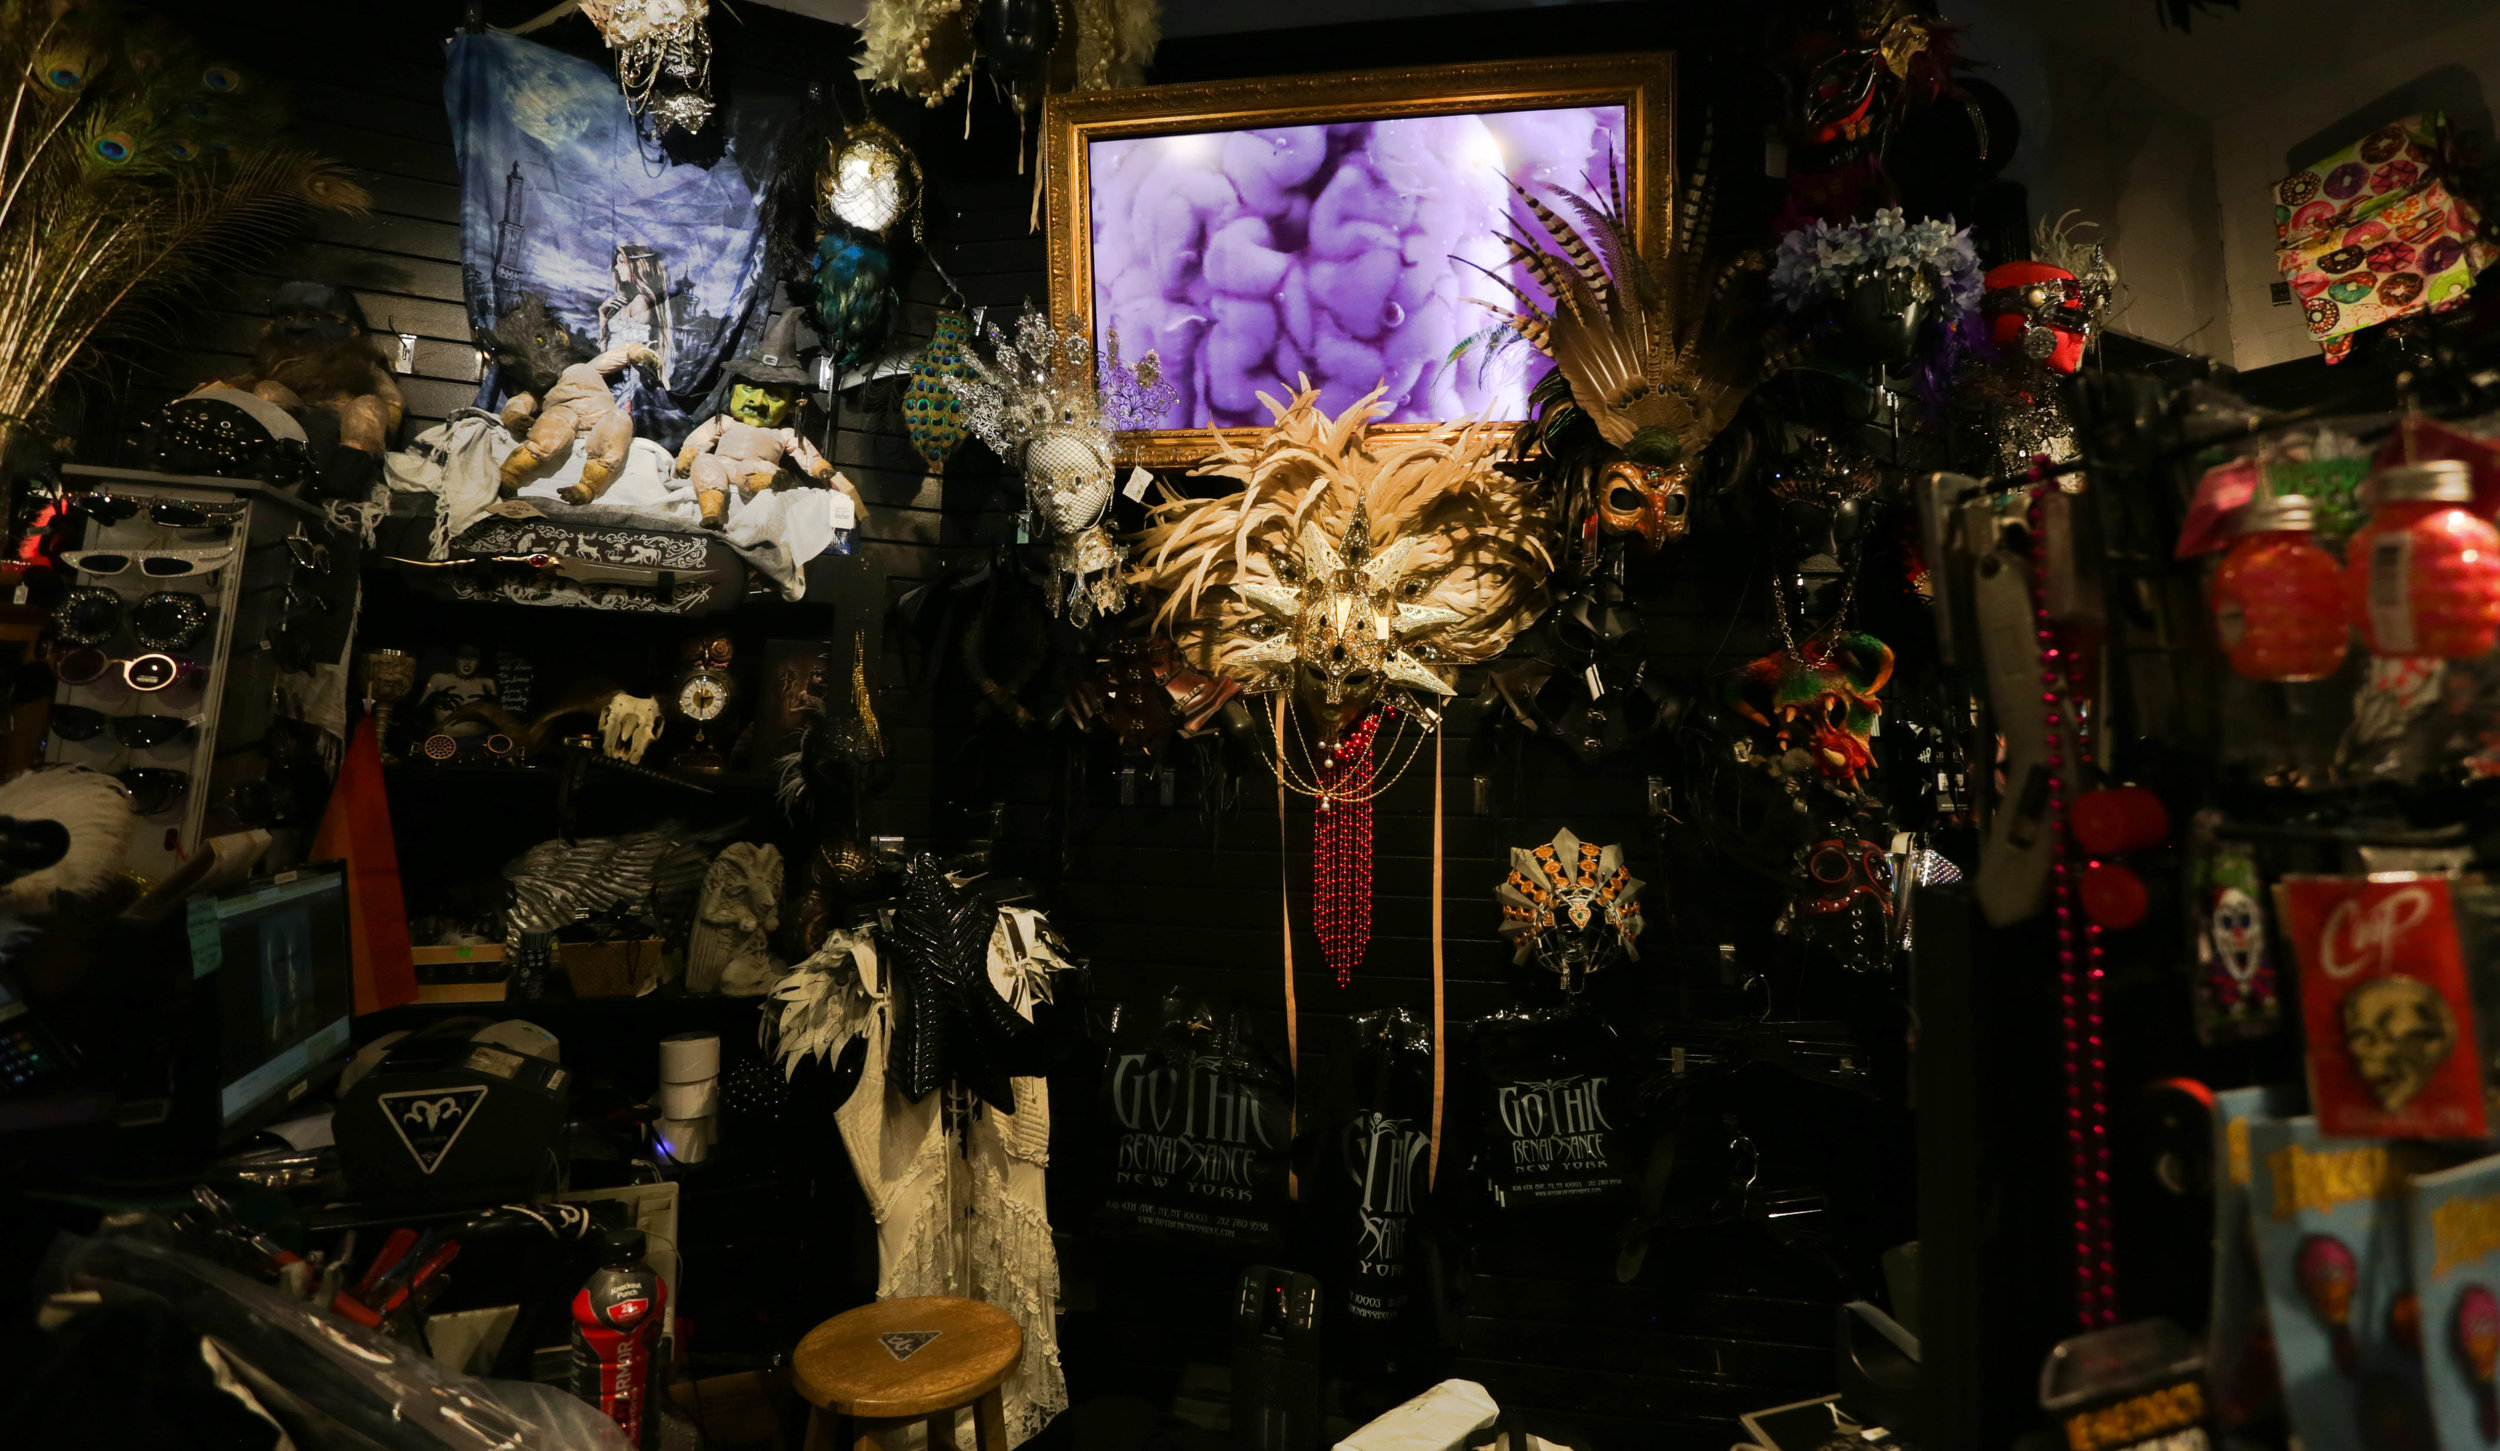 the Goths Shop in Square — Empire State Tribune